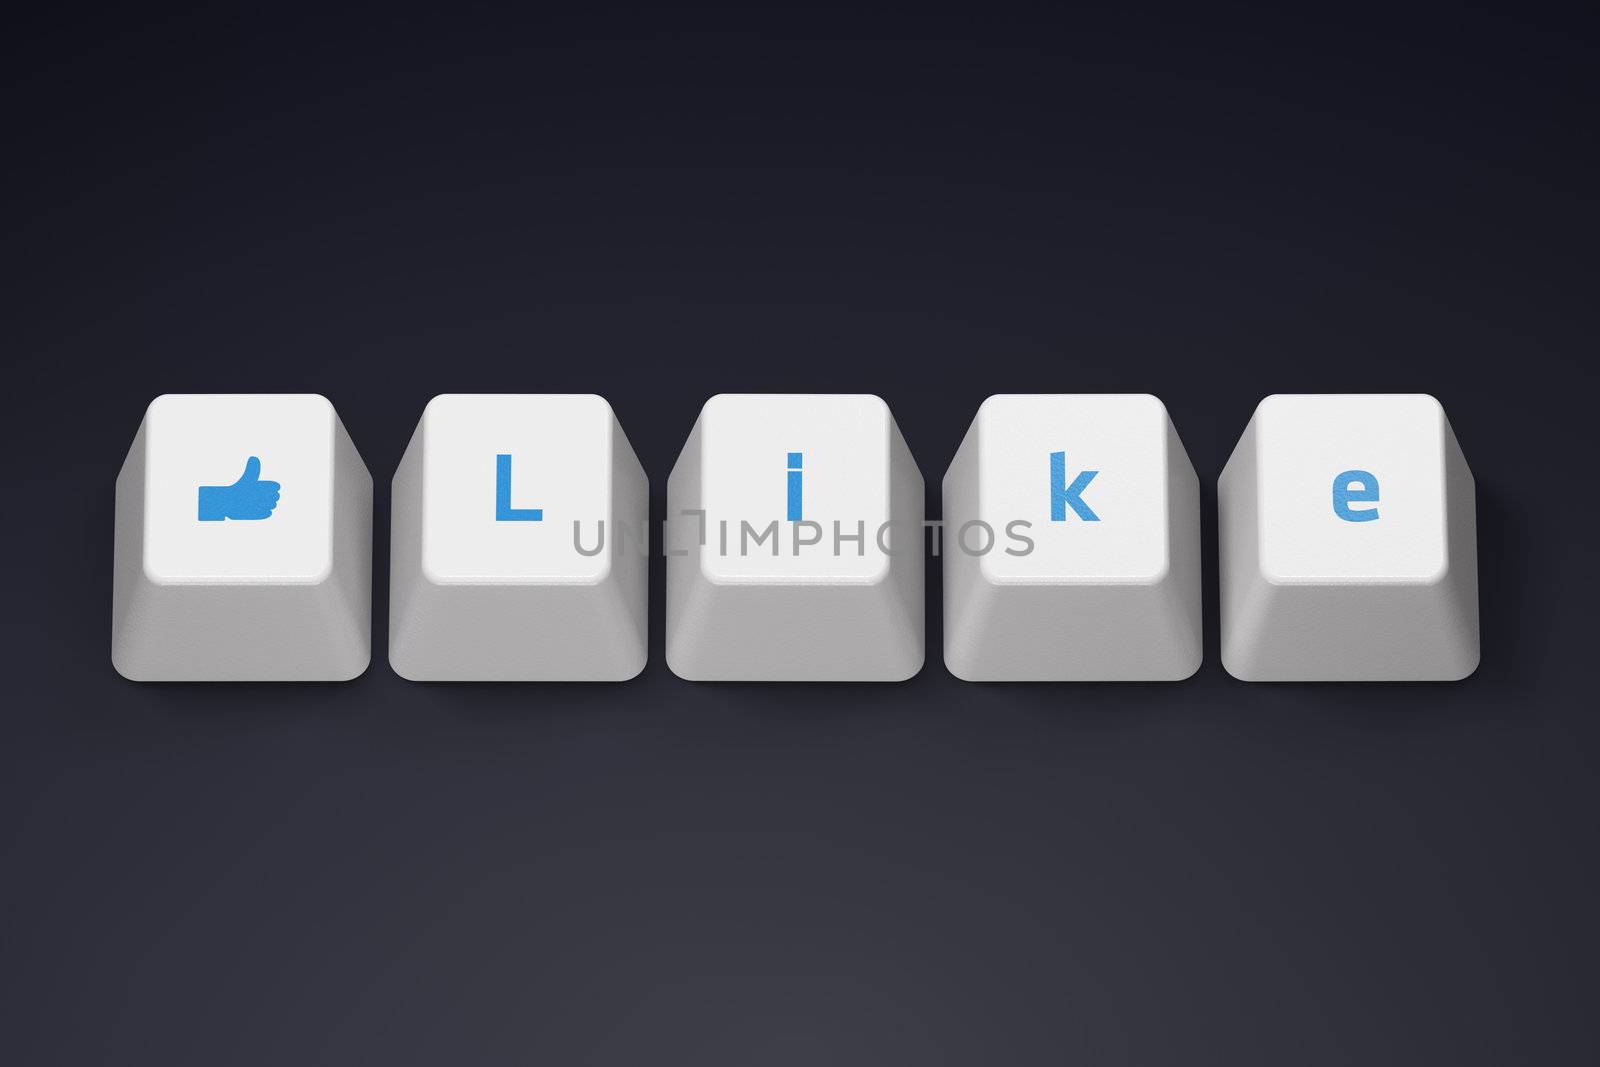 Keyboard's Like buttons, social network concept